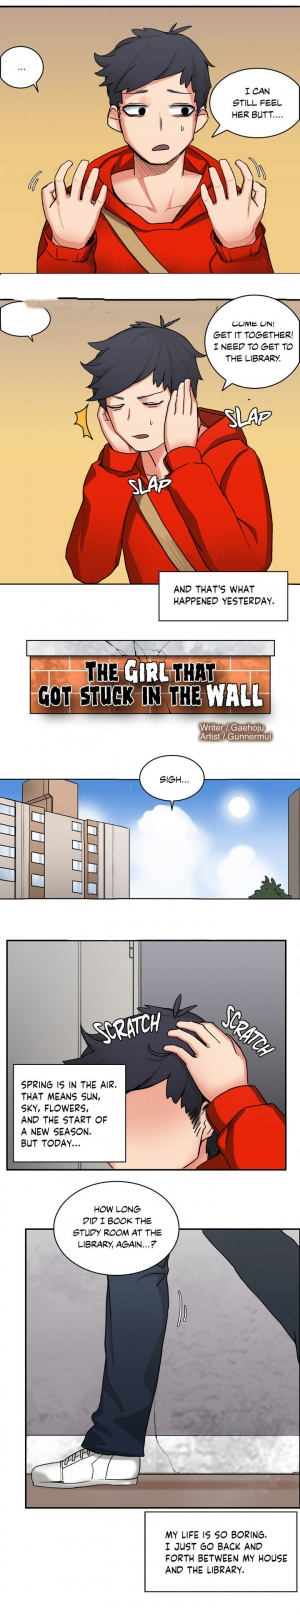 [Gaehoju, Gunnermul] The Girl That Got Stuck in the Wall Ch.11/11 [COMPLETED] [English] [Hentai Universe] - Page 18